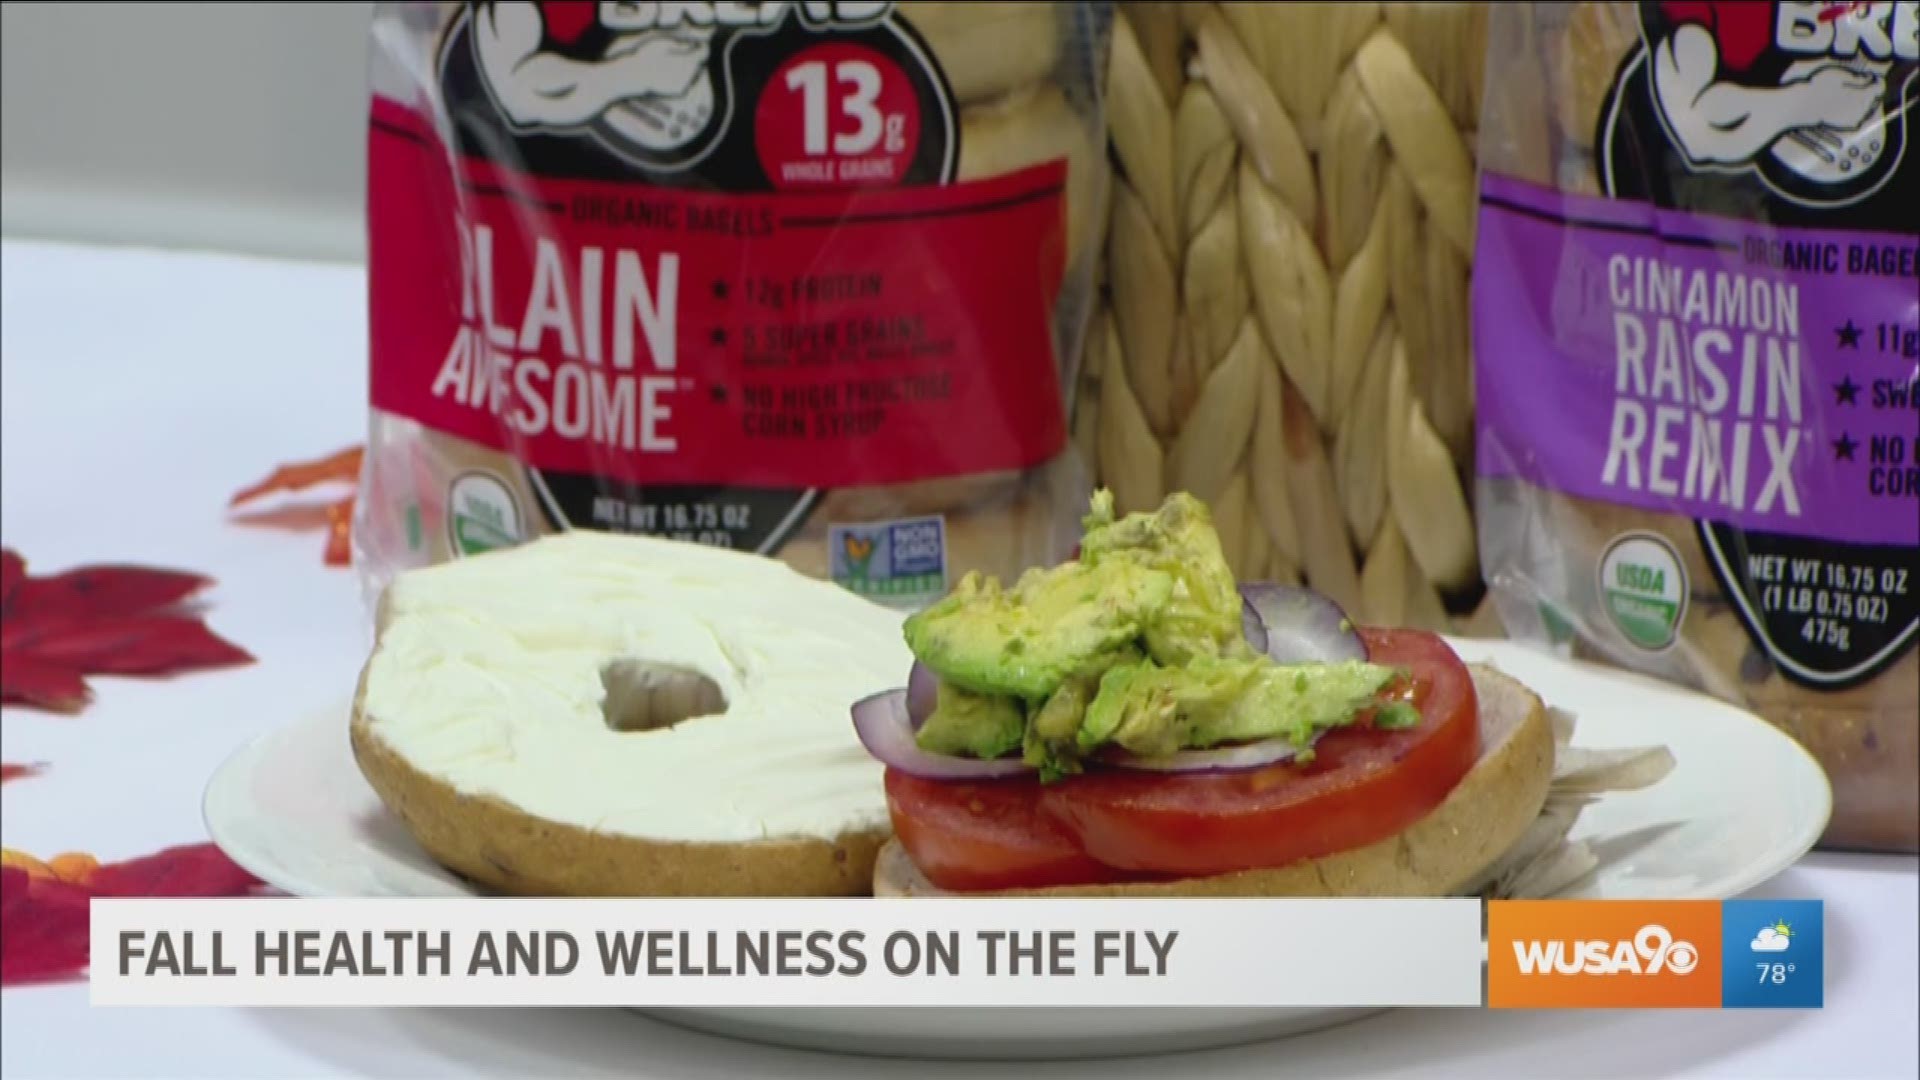 This segment is sponsored by Dave's Killer Bread, Emergen-C and Olay. During the fall, it can be quite difficult to plan a healthy meal or snack on the go. However, fitness and wellness expert Jamie Hess is here to provide tips and tricks to help simplify your fall routine.